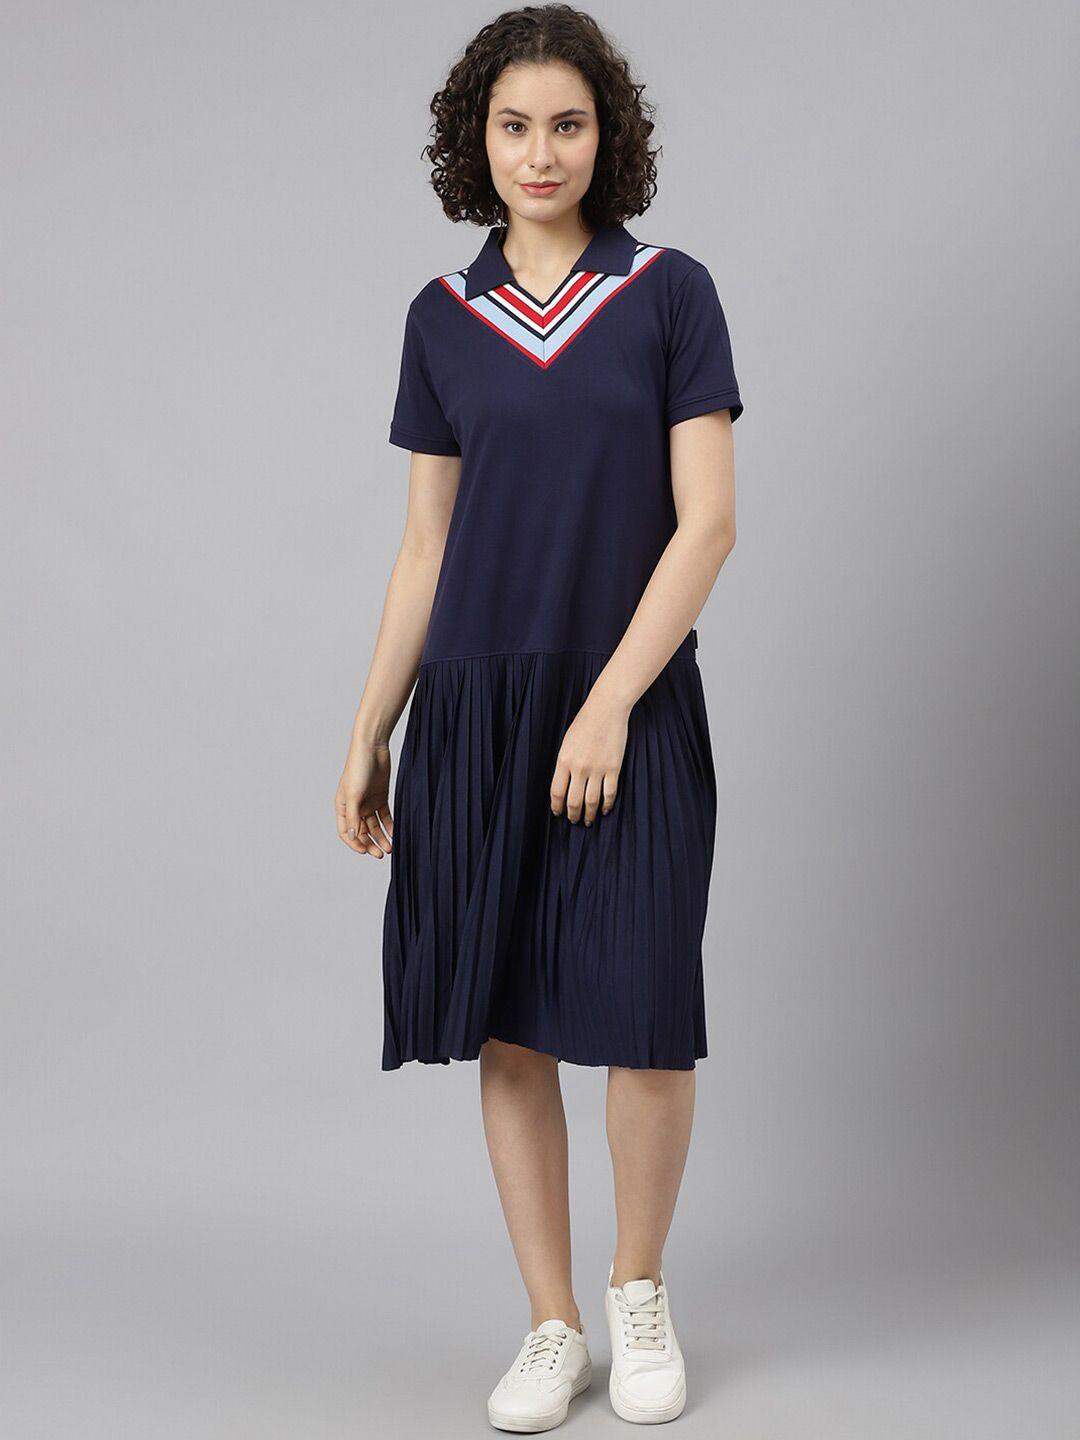 beverly-hills-polo-club-women-navy-blue-solid-pleated-dress